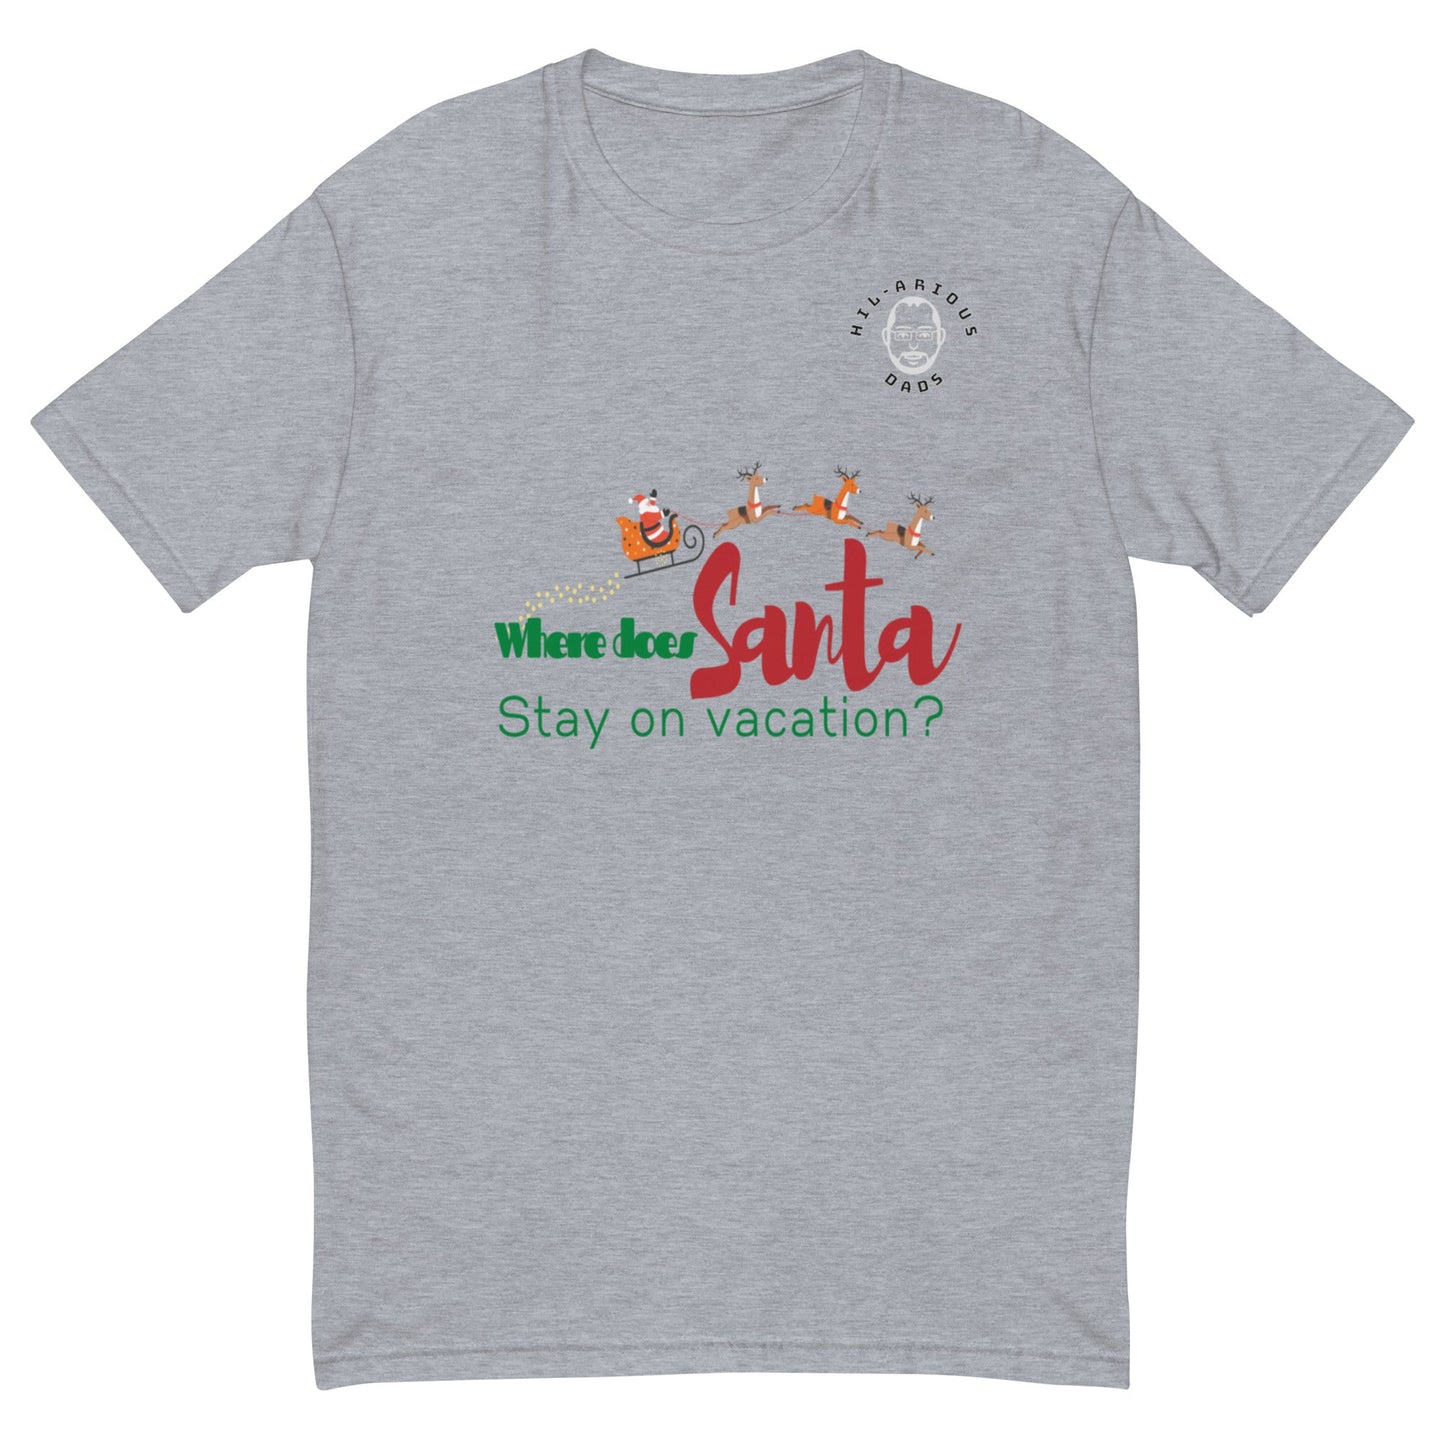 Where does Santa stay on vacation?-T-shirt - Hil-arious Dads